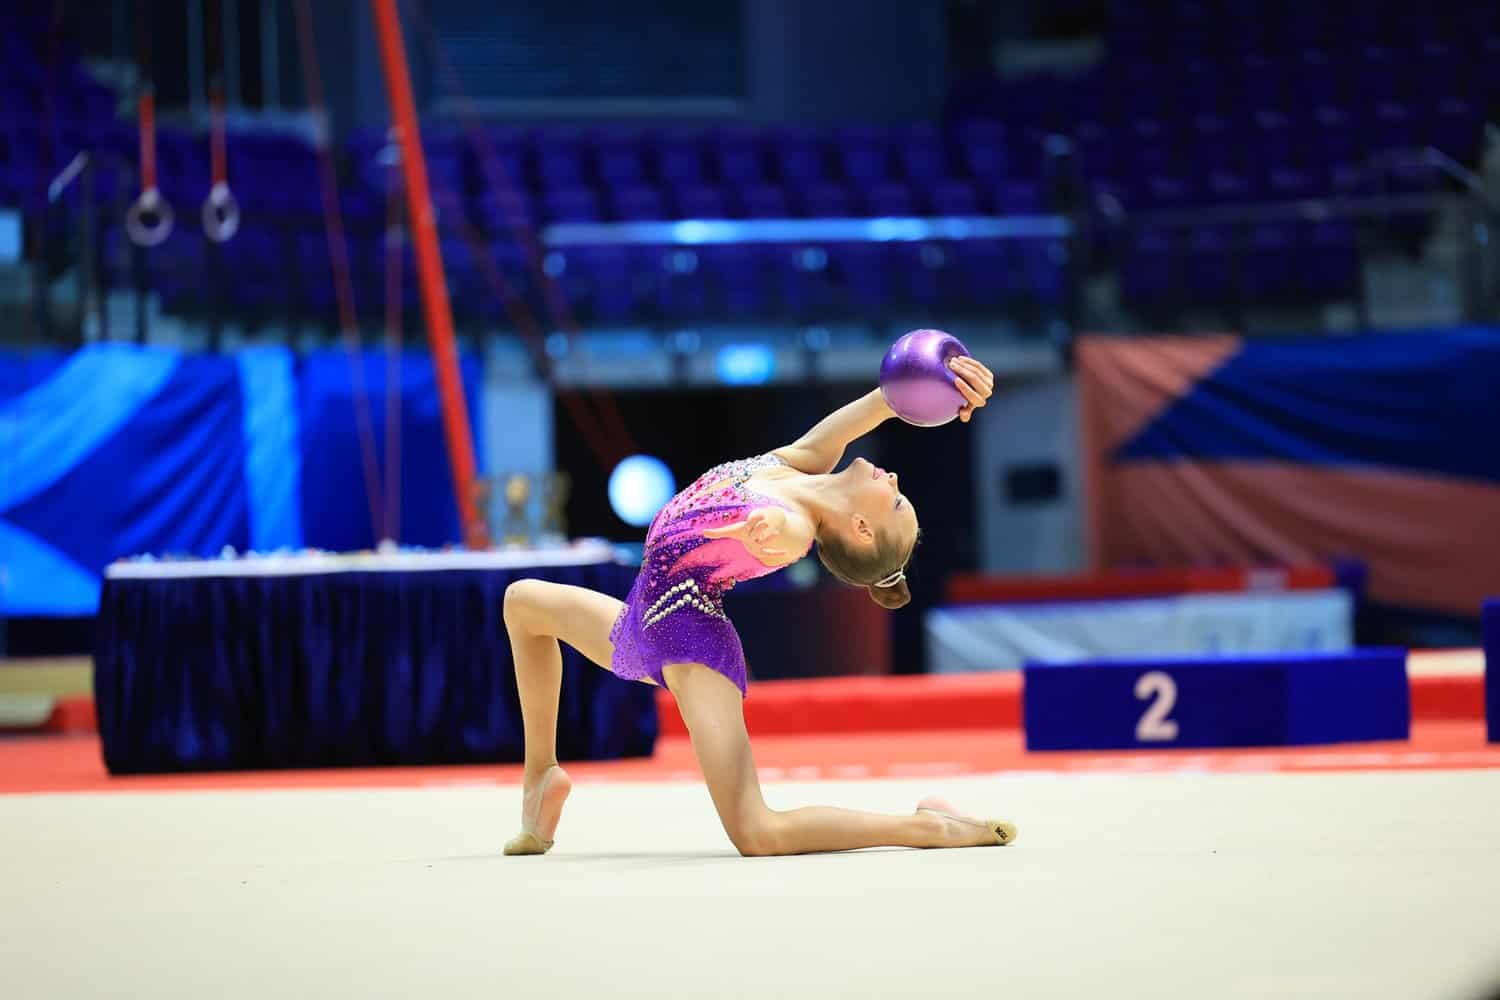 Artistic, rhythmic gymnastics require different strengths – The